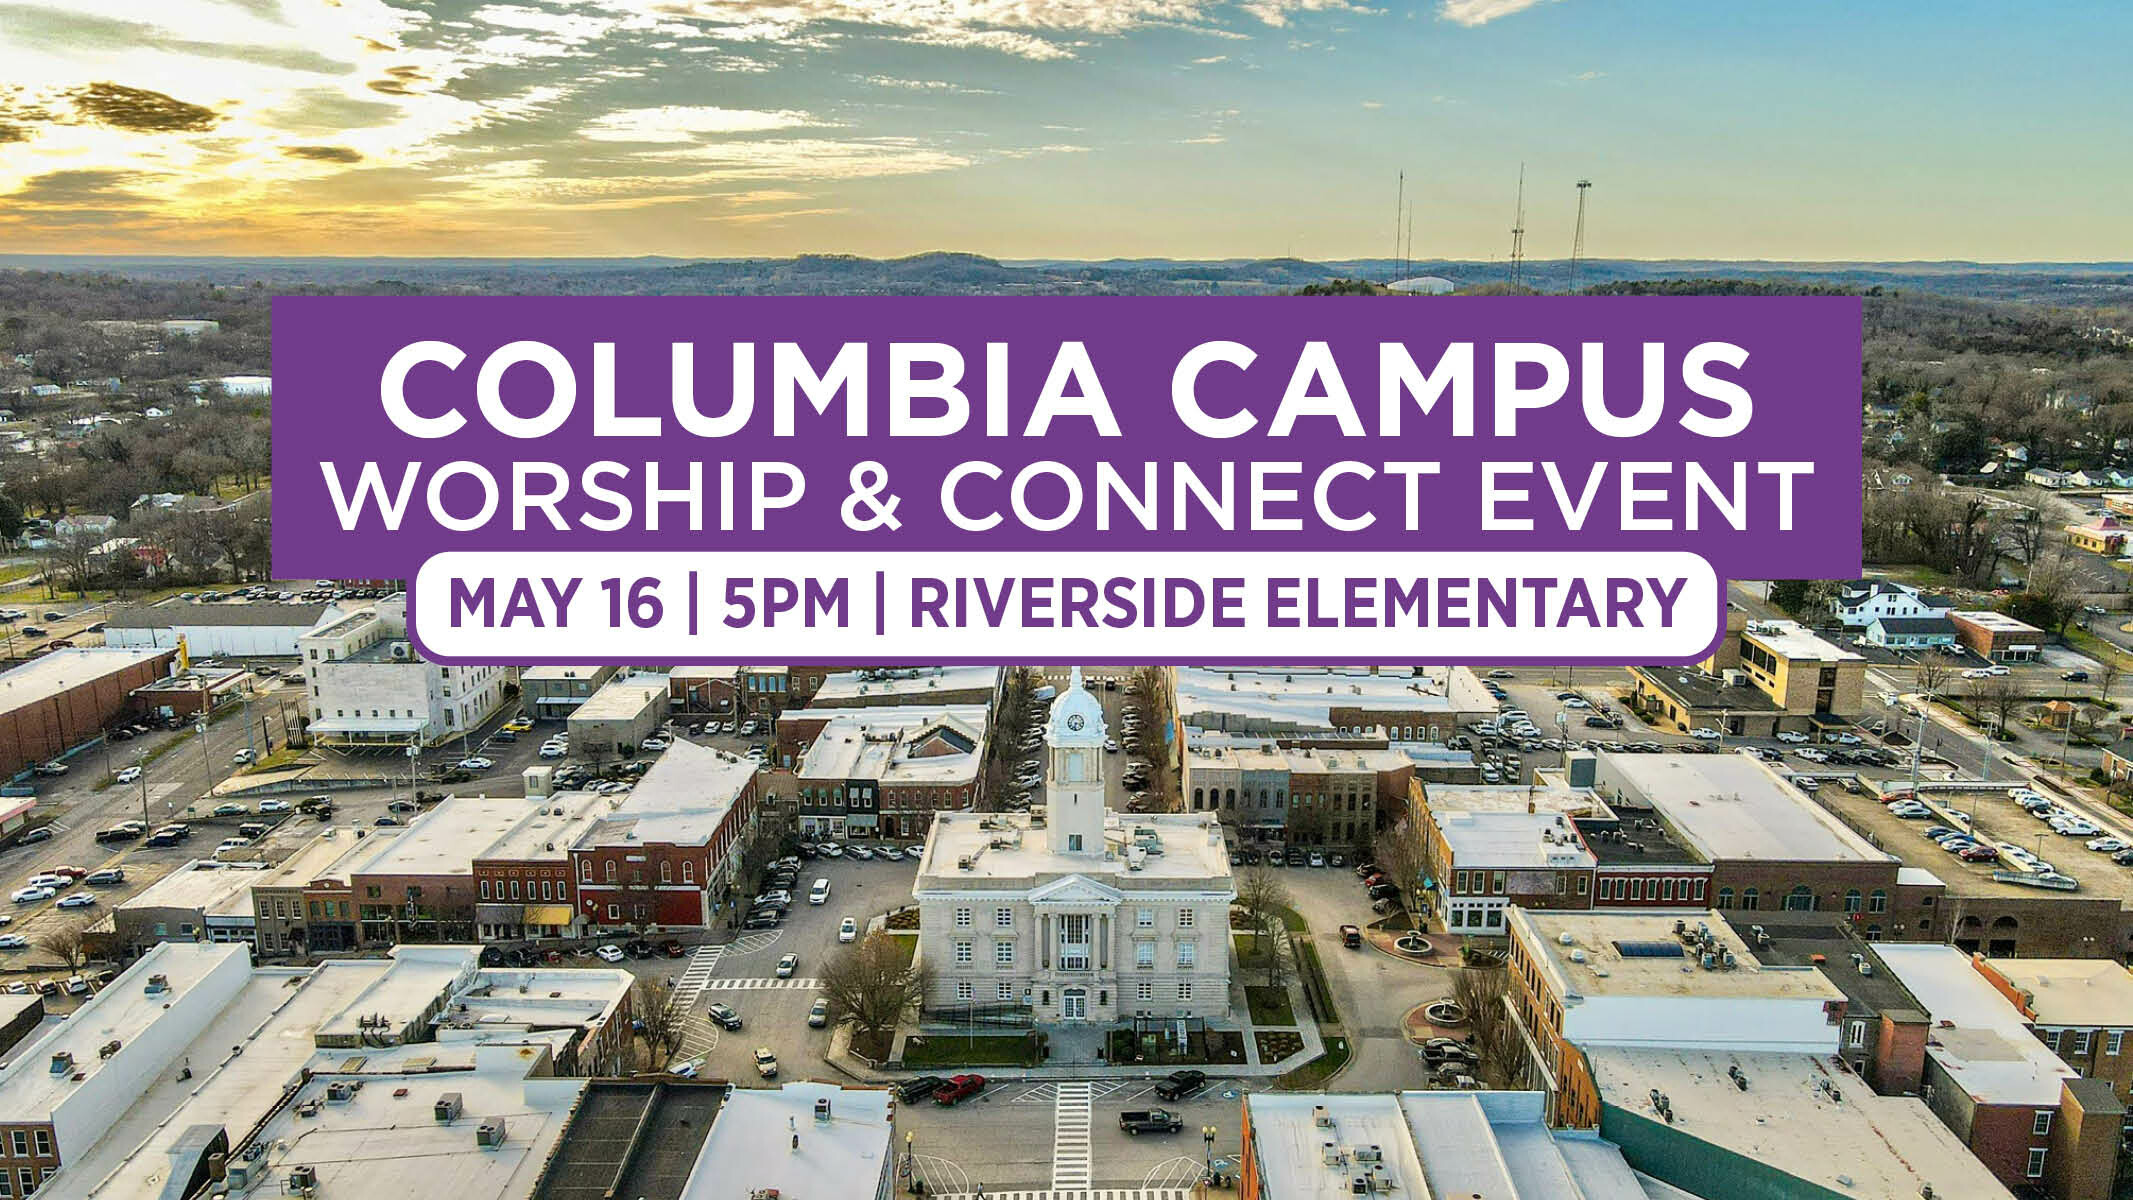 Columbia Campus Worship & Connect Event